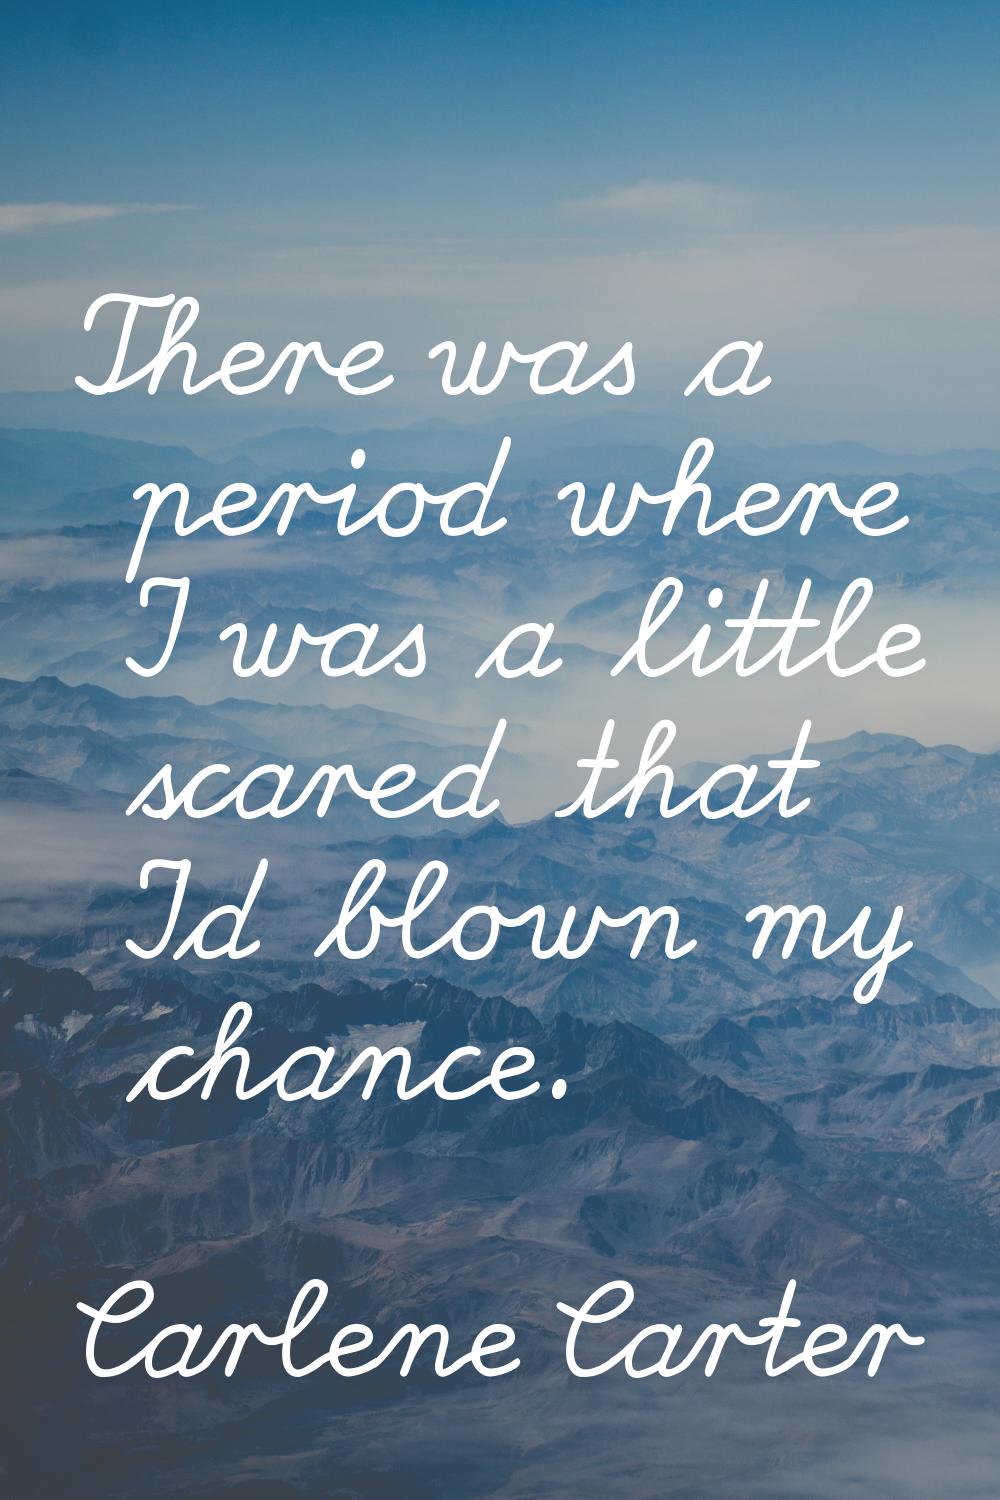 There was a period where I was a little scared that I'd blown my chance.